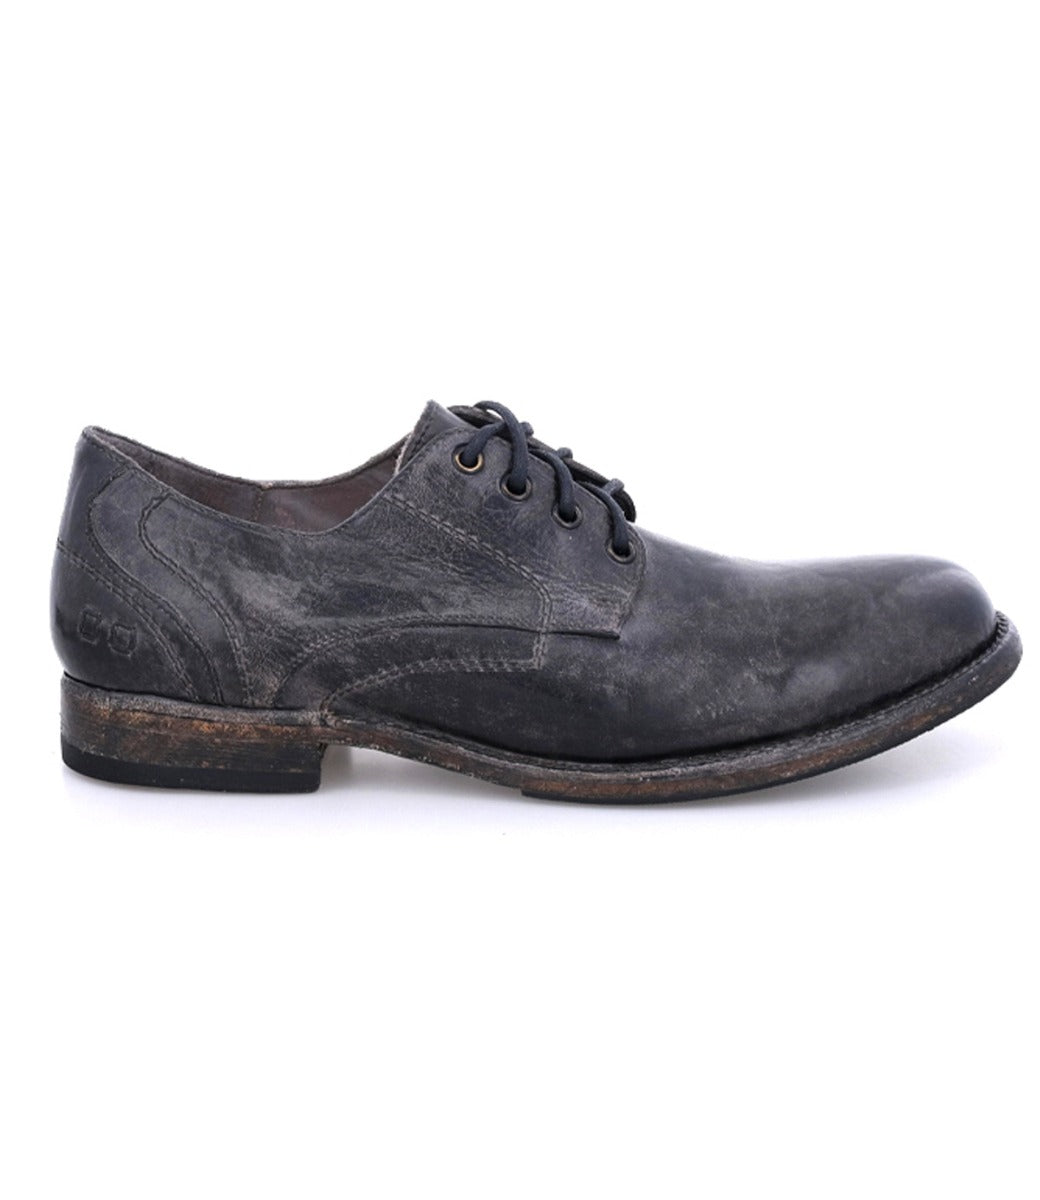 A men's Galao derby shoe with a Bed Stu leather sole.